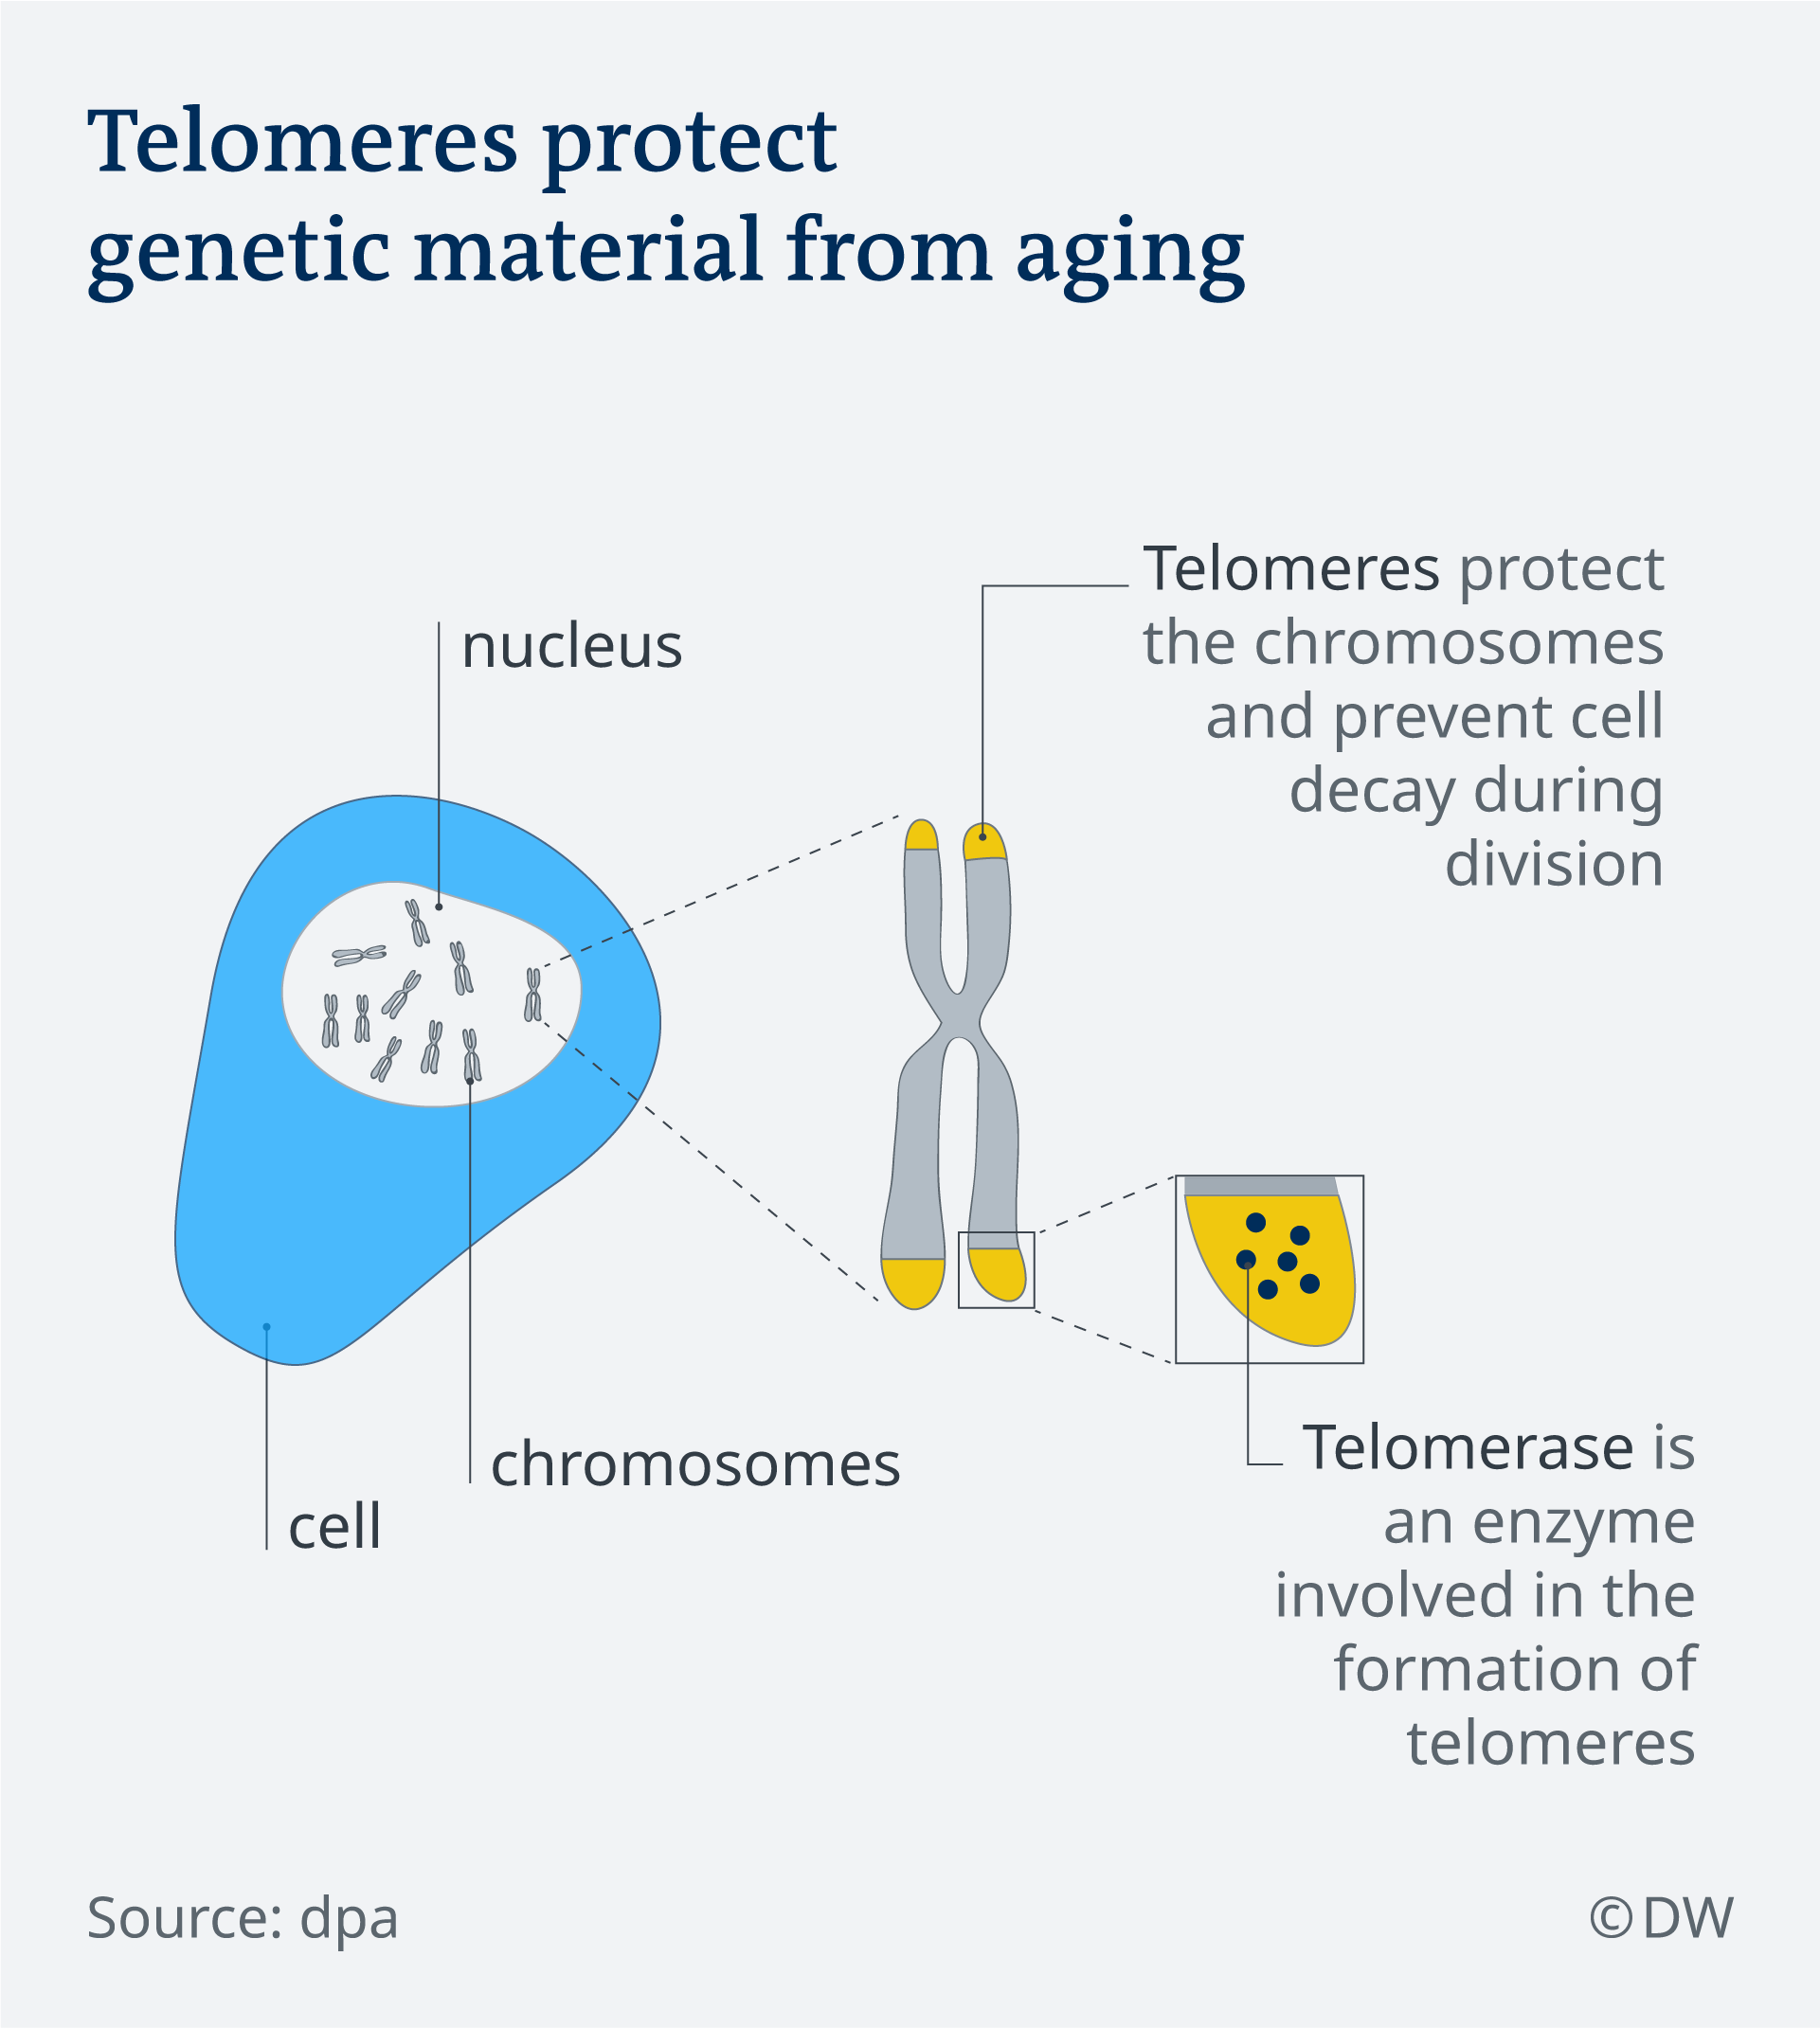 An infographic showing how telomeres protect a person's genetic material from aging